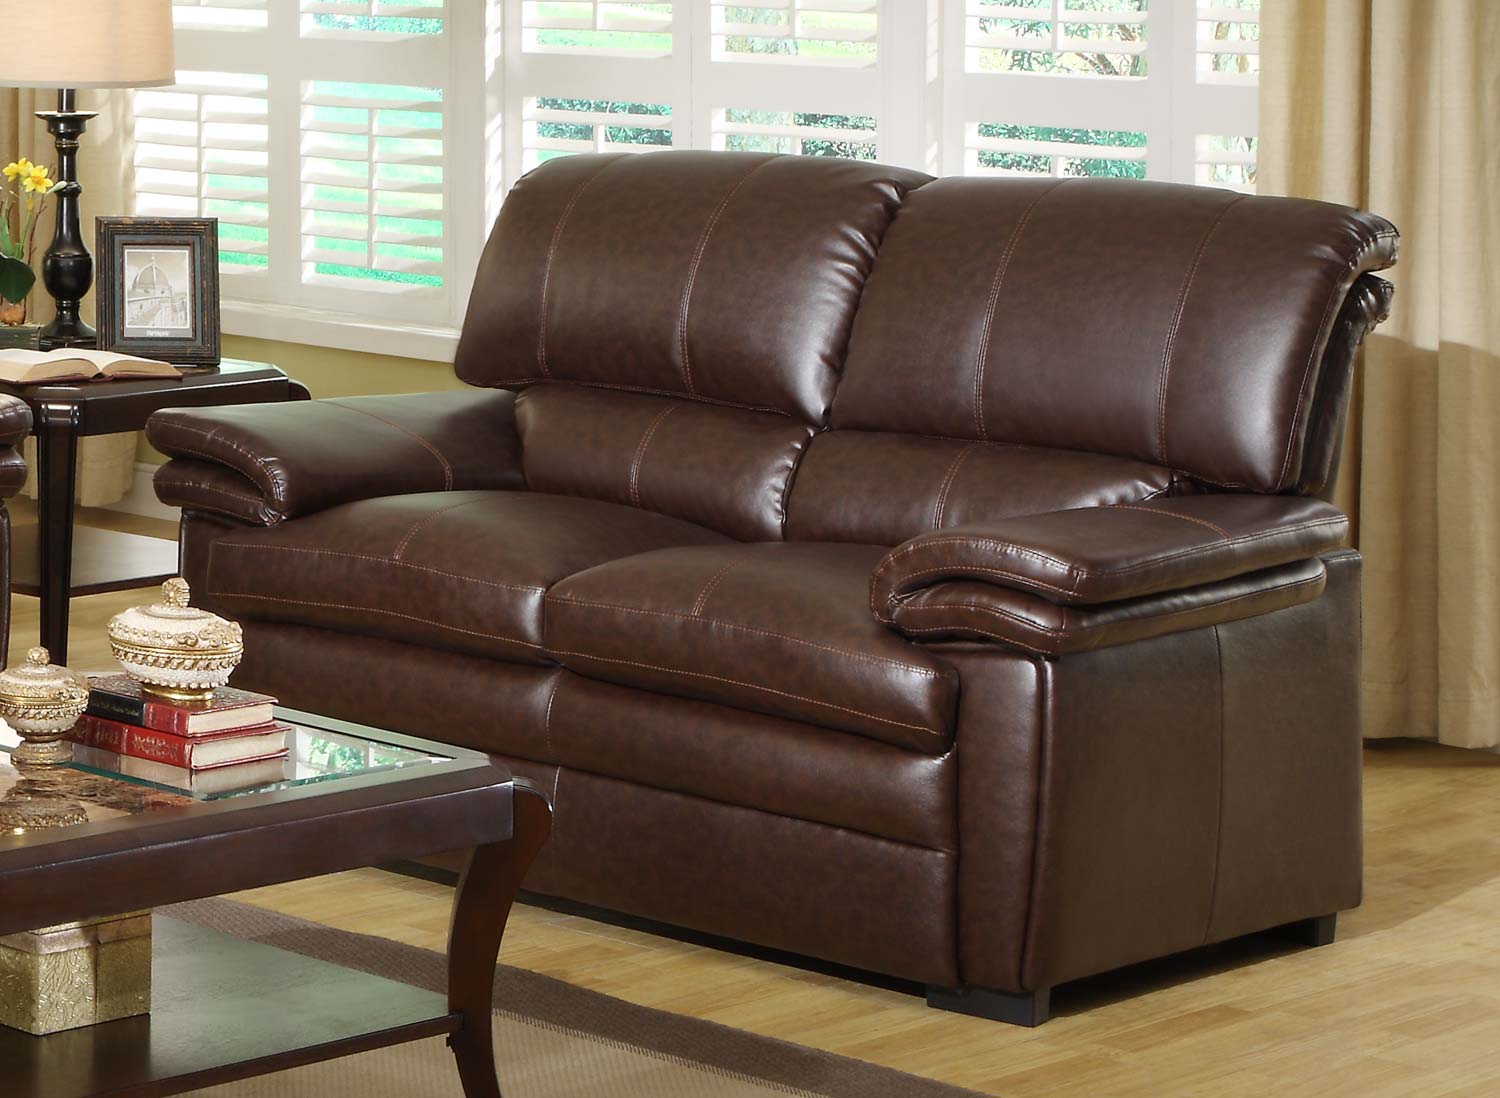 Homelegance Constance Love Seat - Brown - Bonded Leather Match